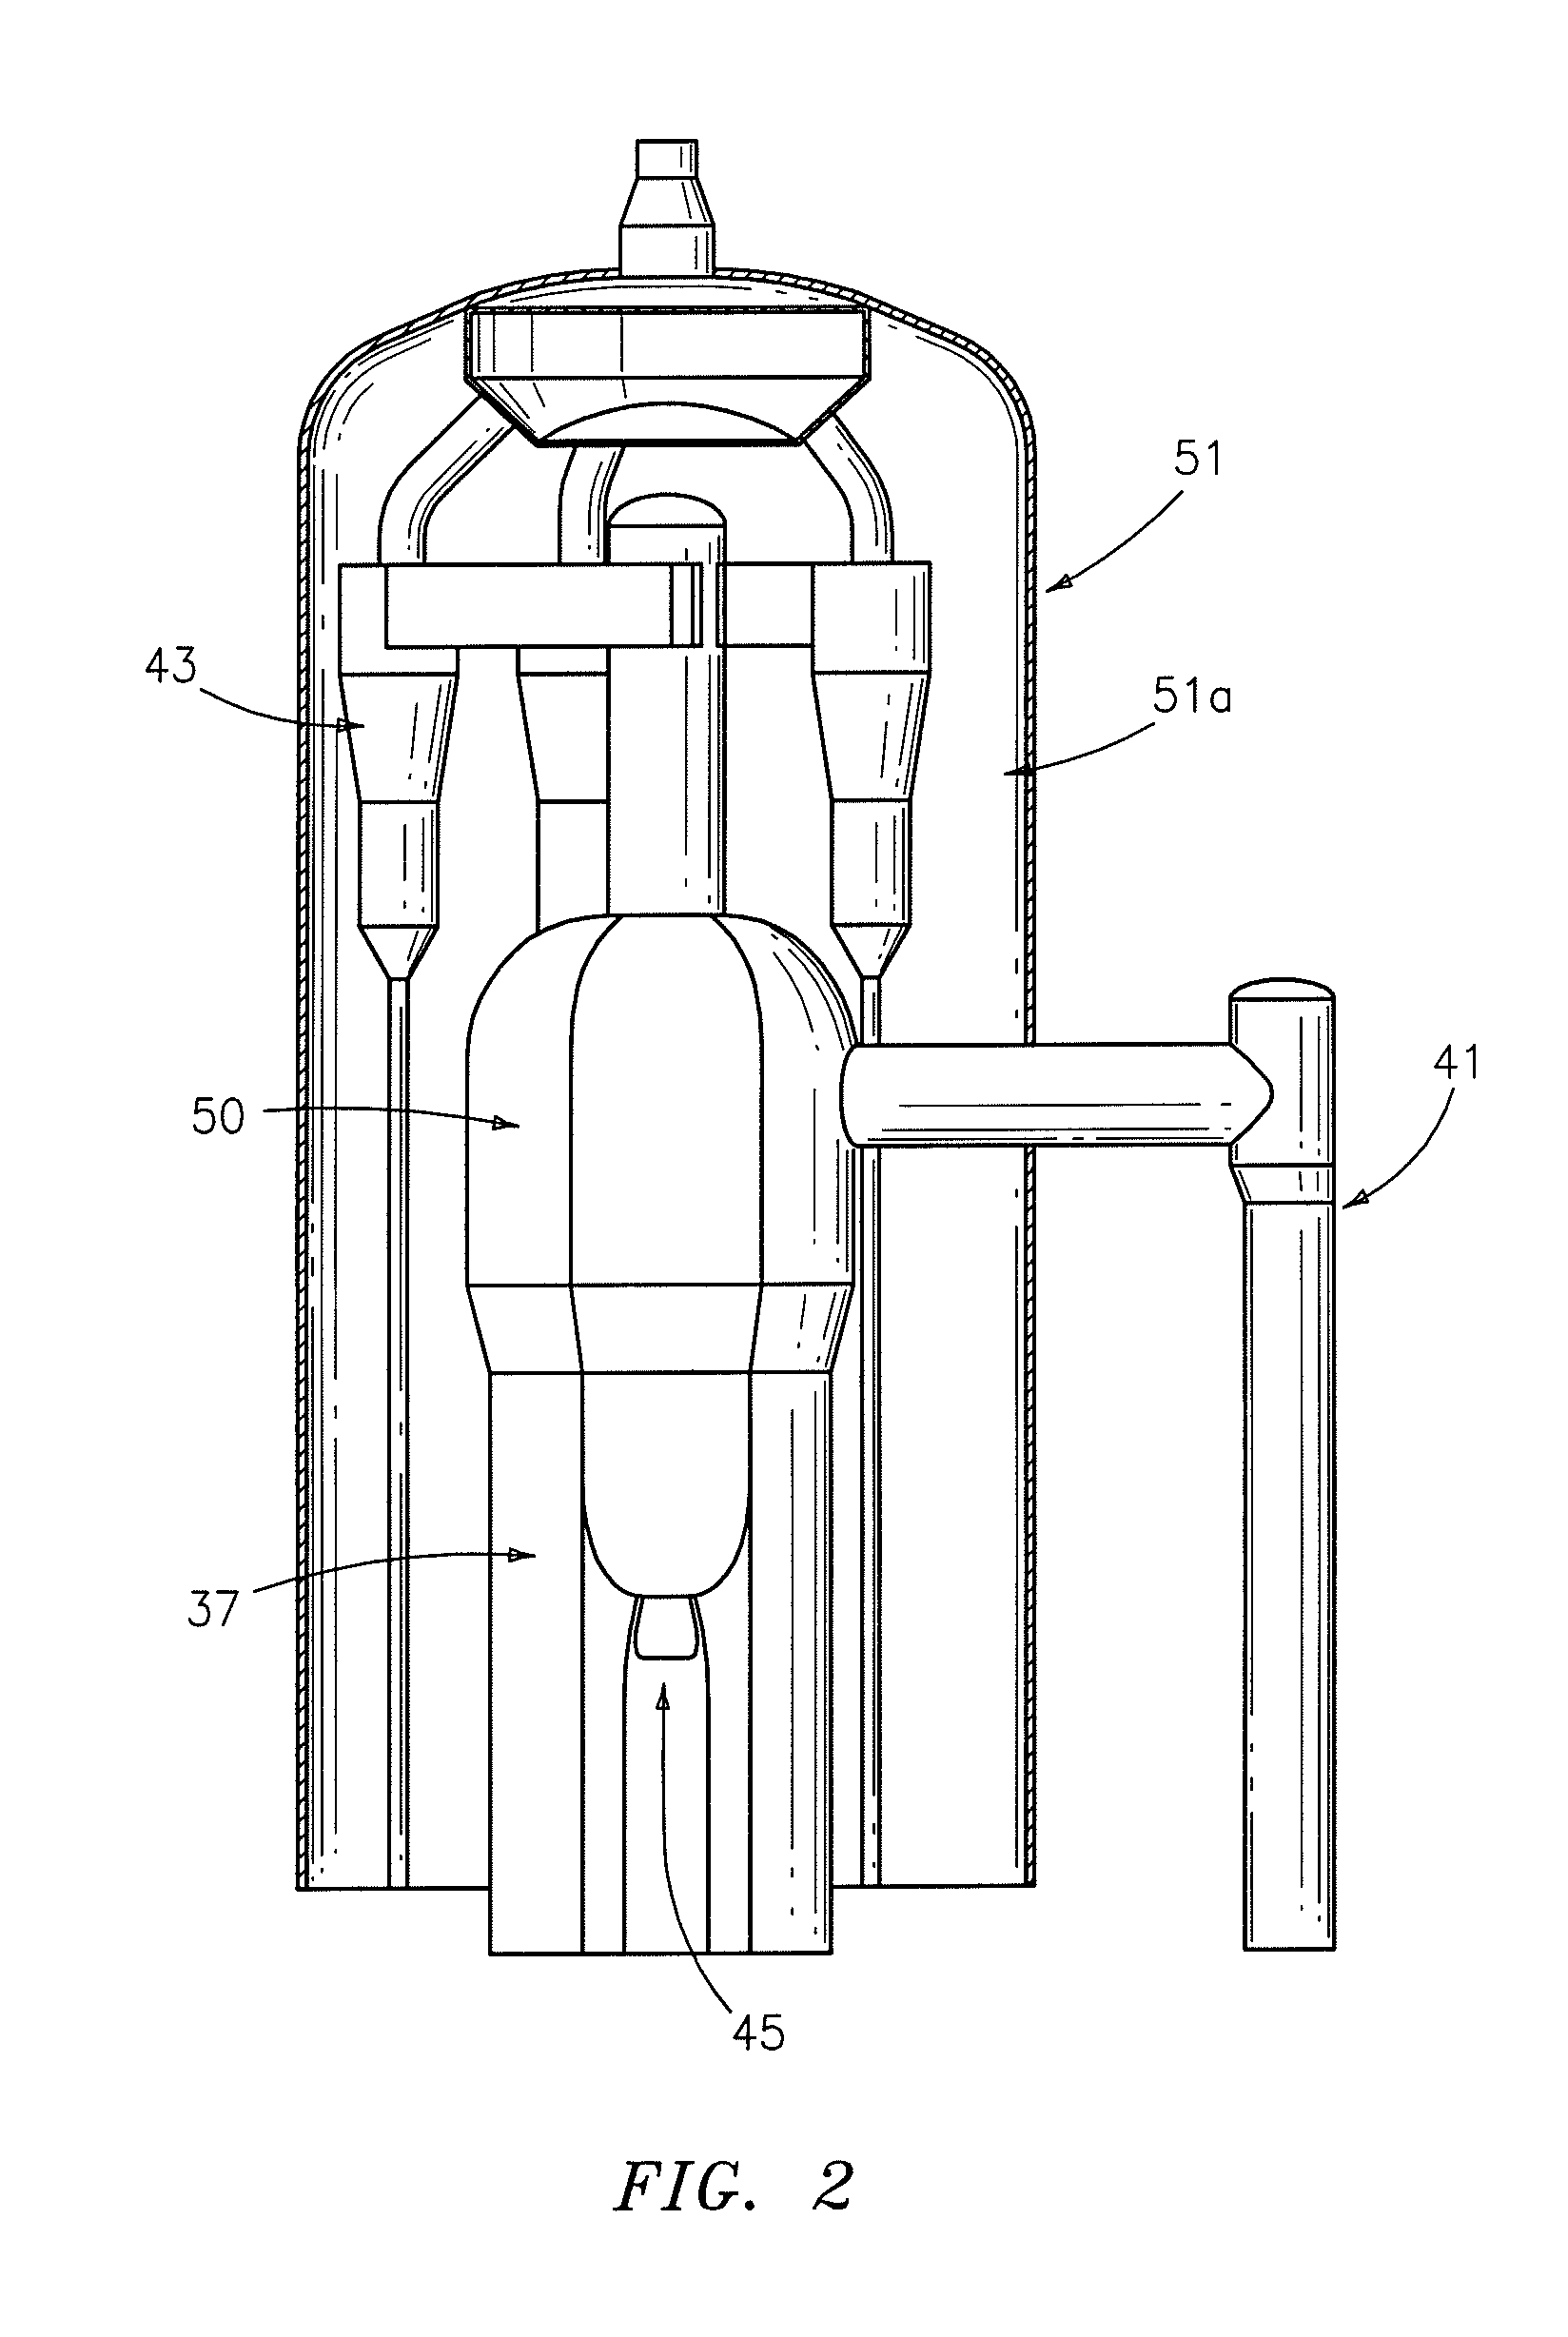 Separating and stripping apparatus for external FCC risers